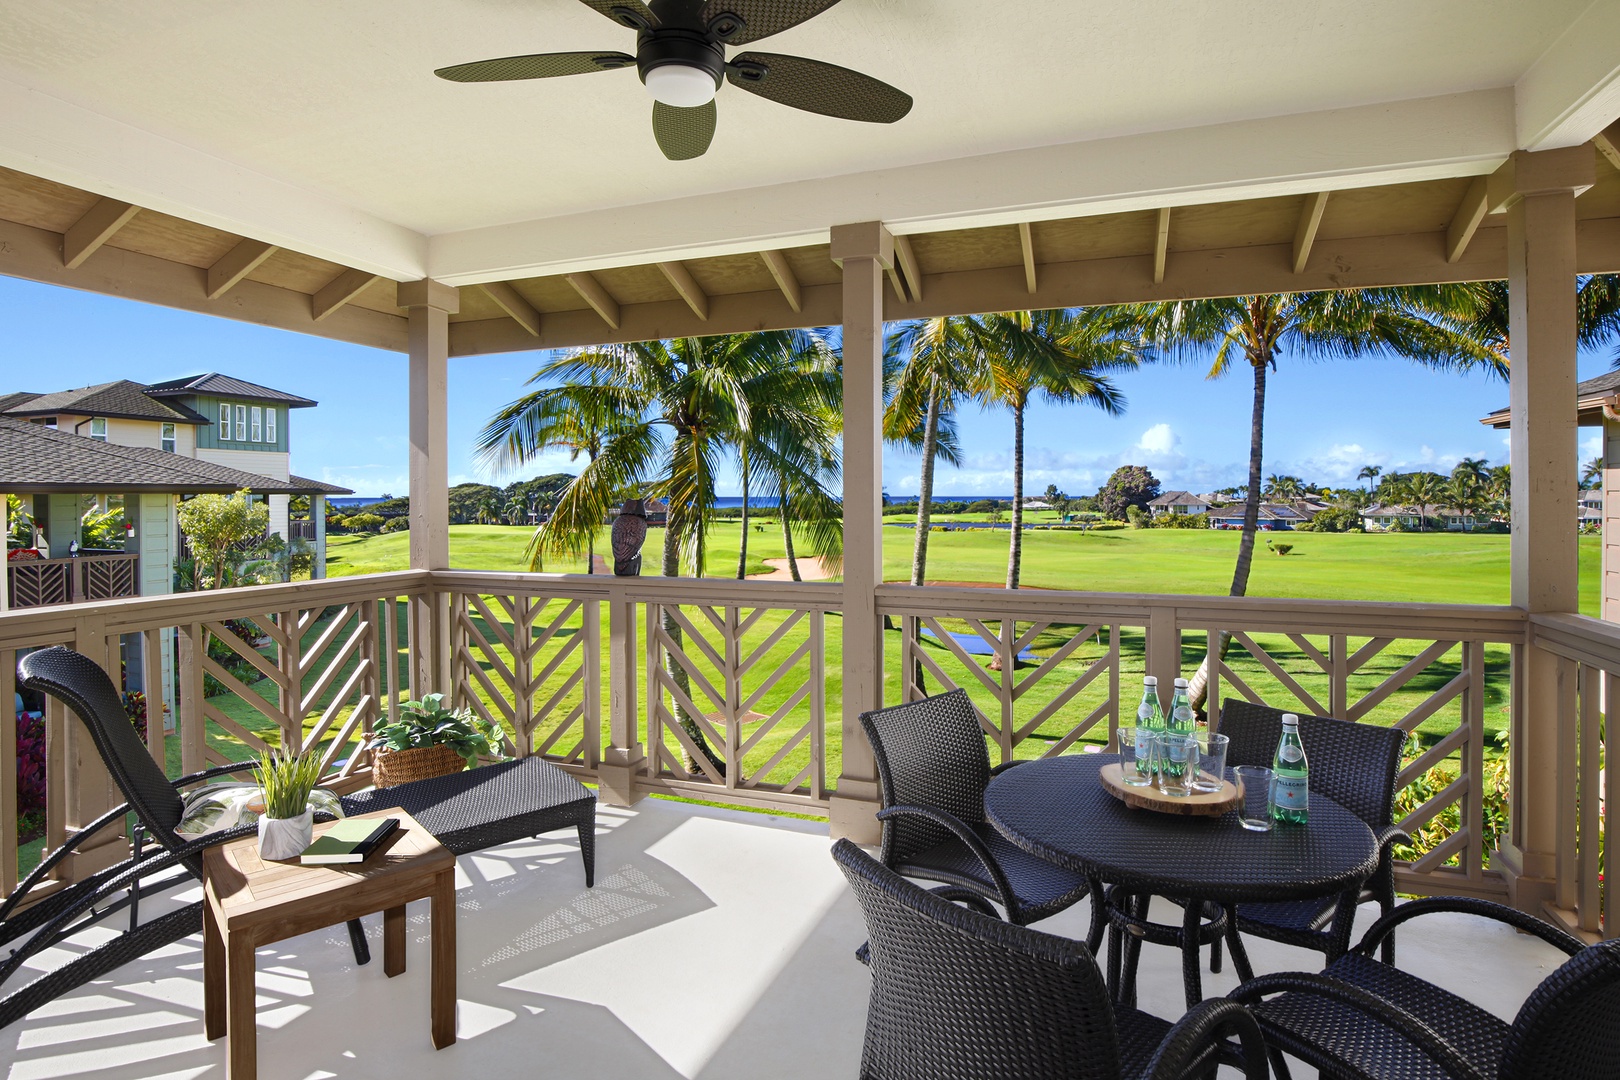 Koloa Vacation Rentals, Pili Mai 8C - Lanai with golf course and distant ocean view